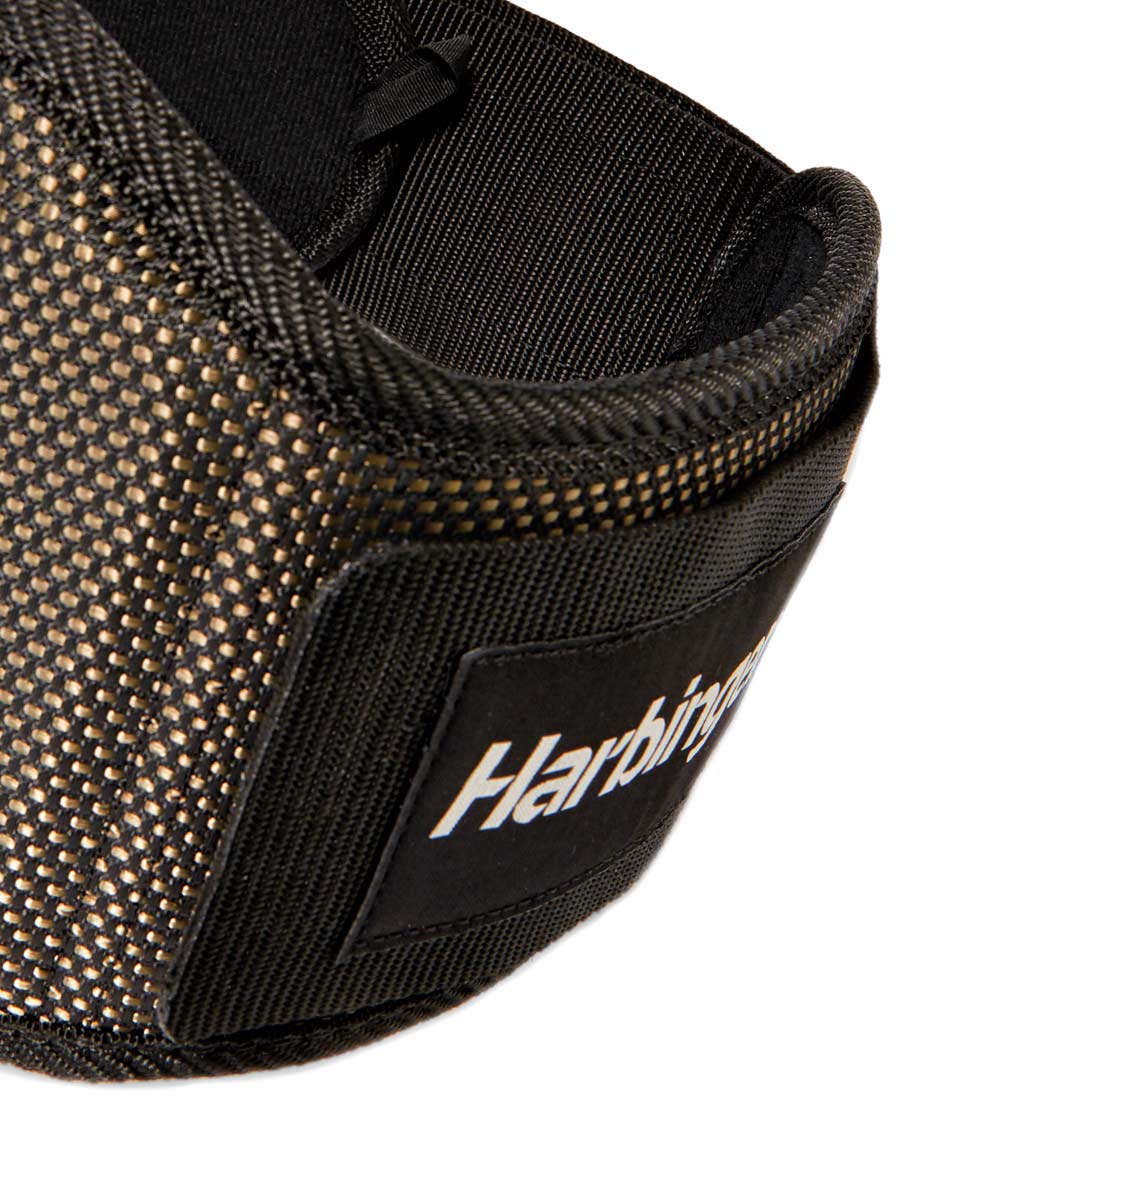  Weighted workout belt for Fat Body